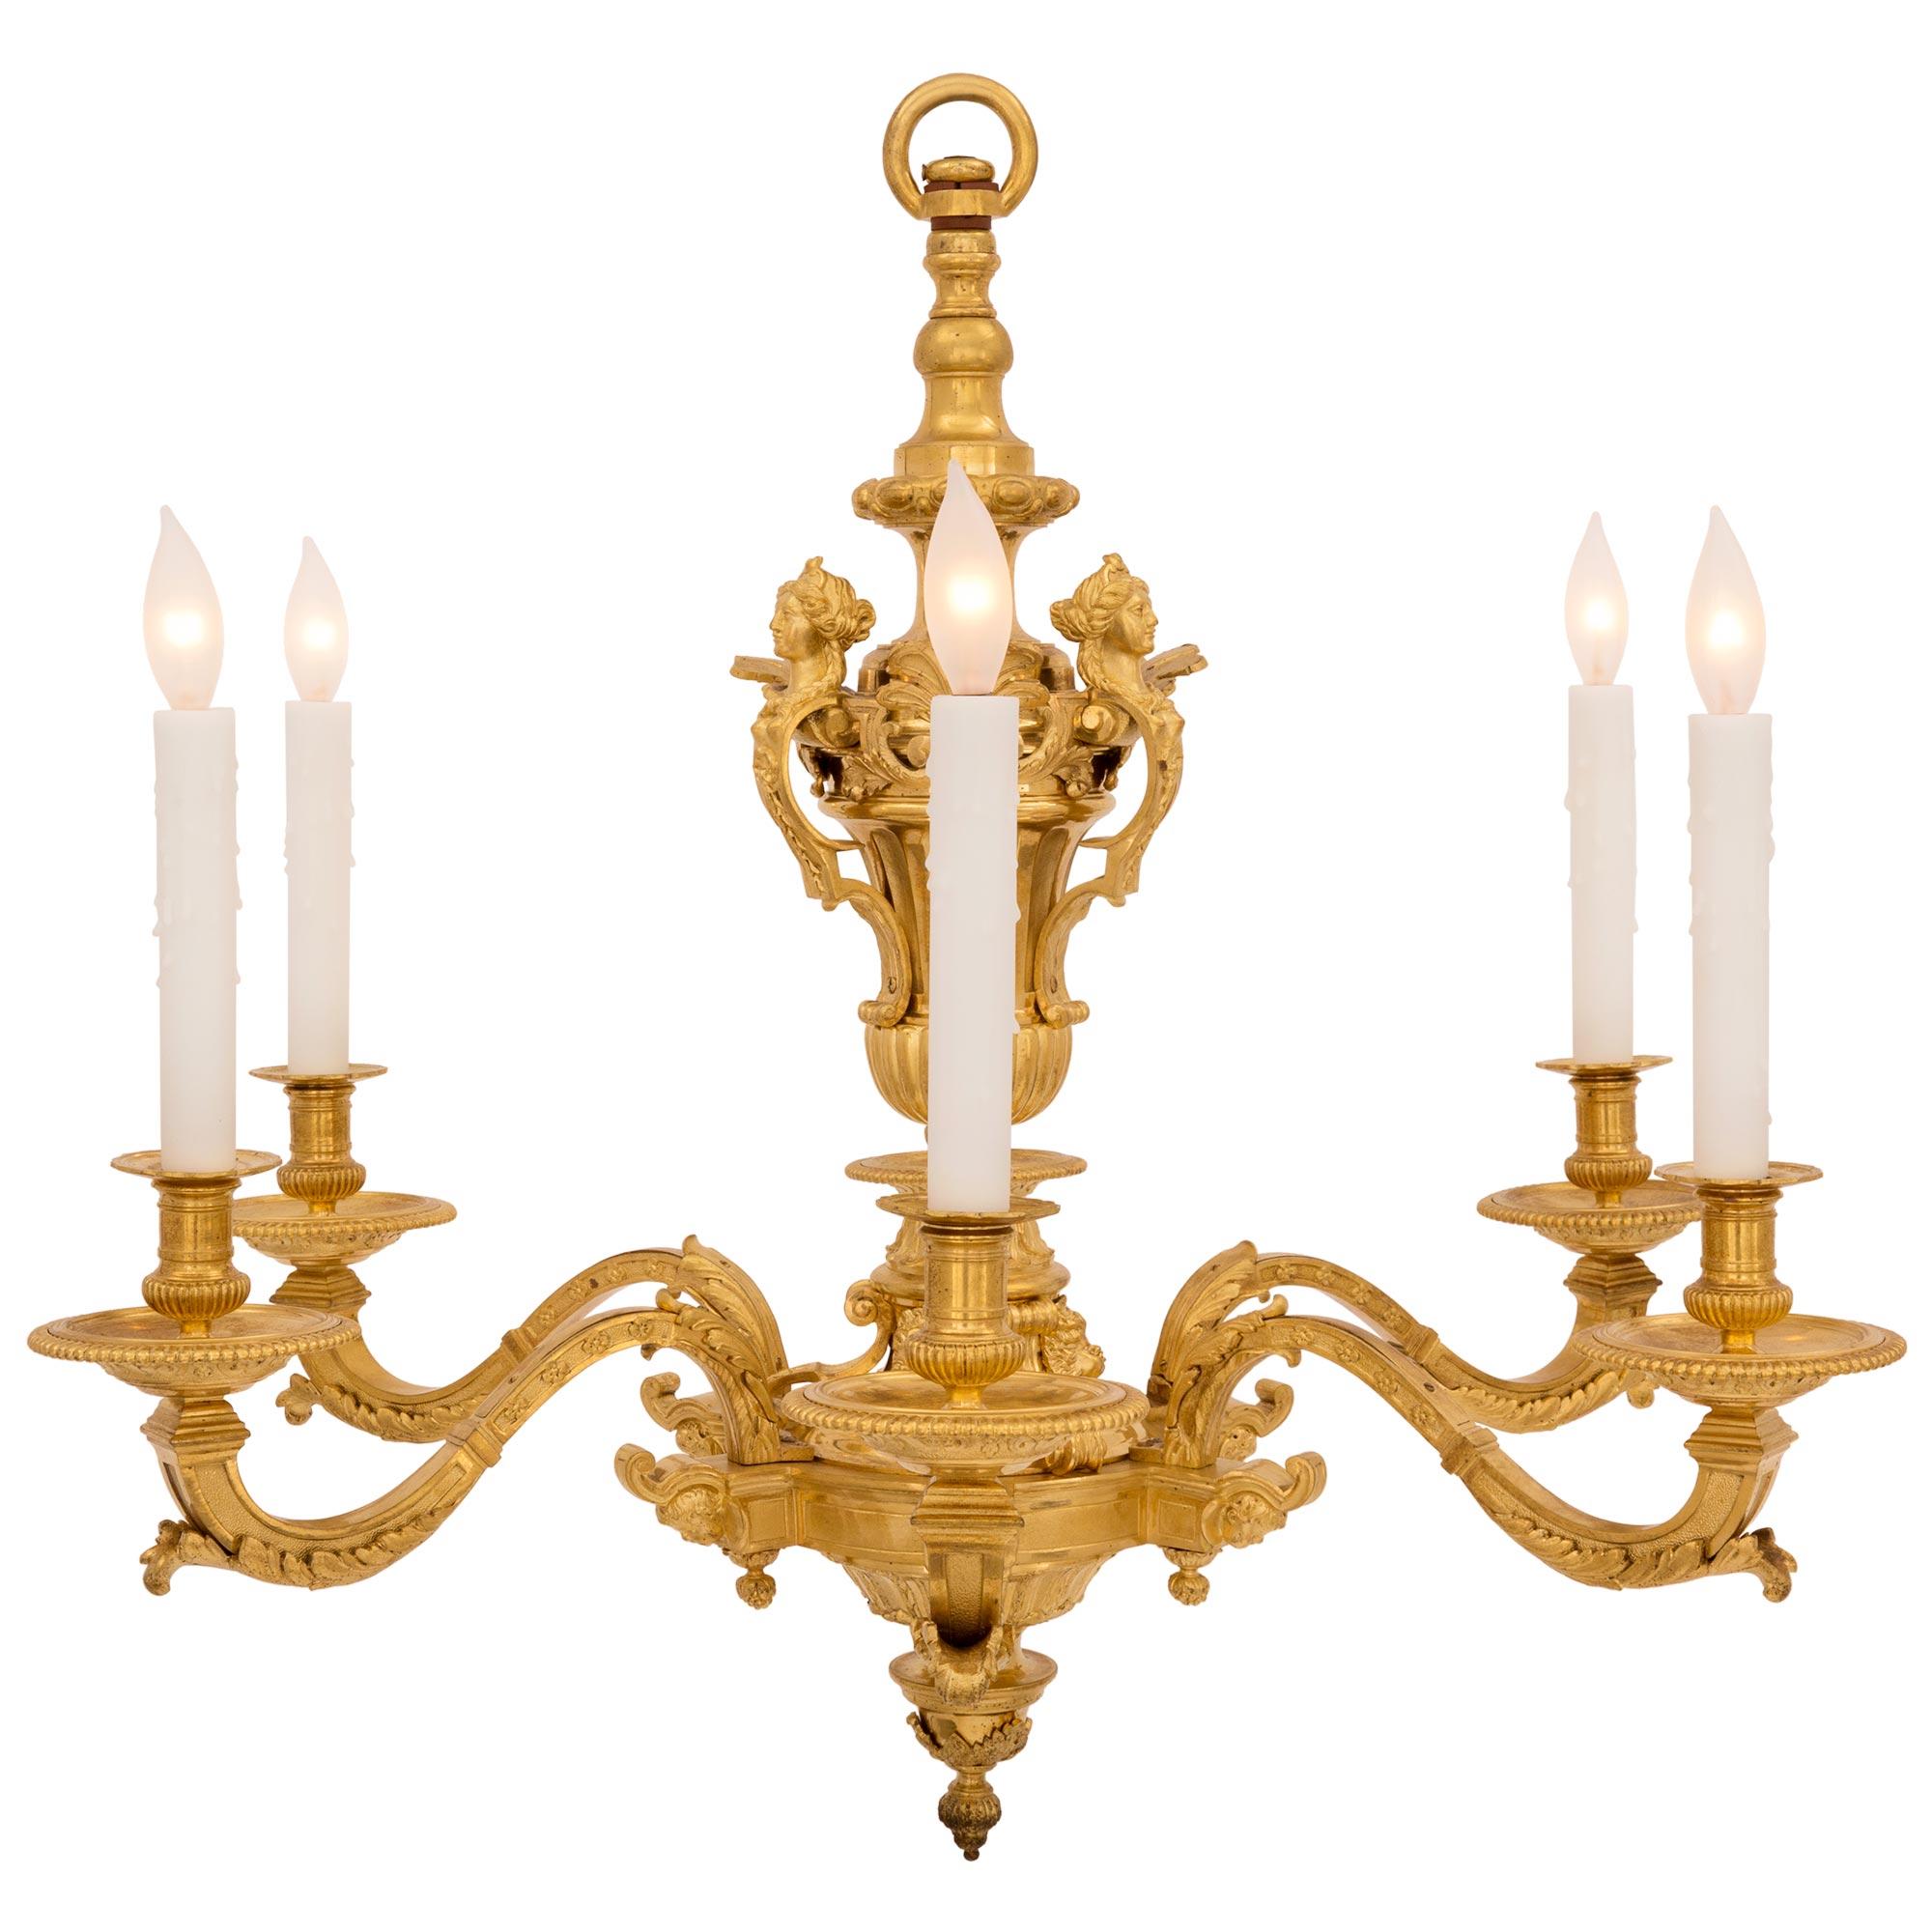 A most handsome French 19th century Louis XVI st. ormolu chandelier. The eight arm chandelier is centered by a lovely bottom acorn finial below fine foliate mounts with a mottled and reeded design centered by a charming acorn finial. Each of the